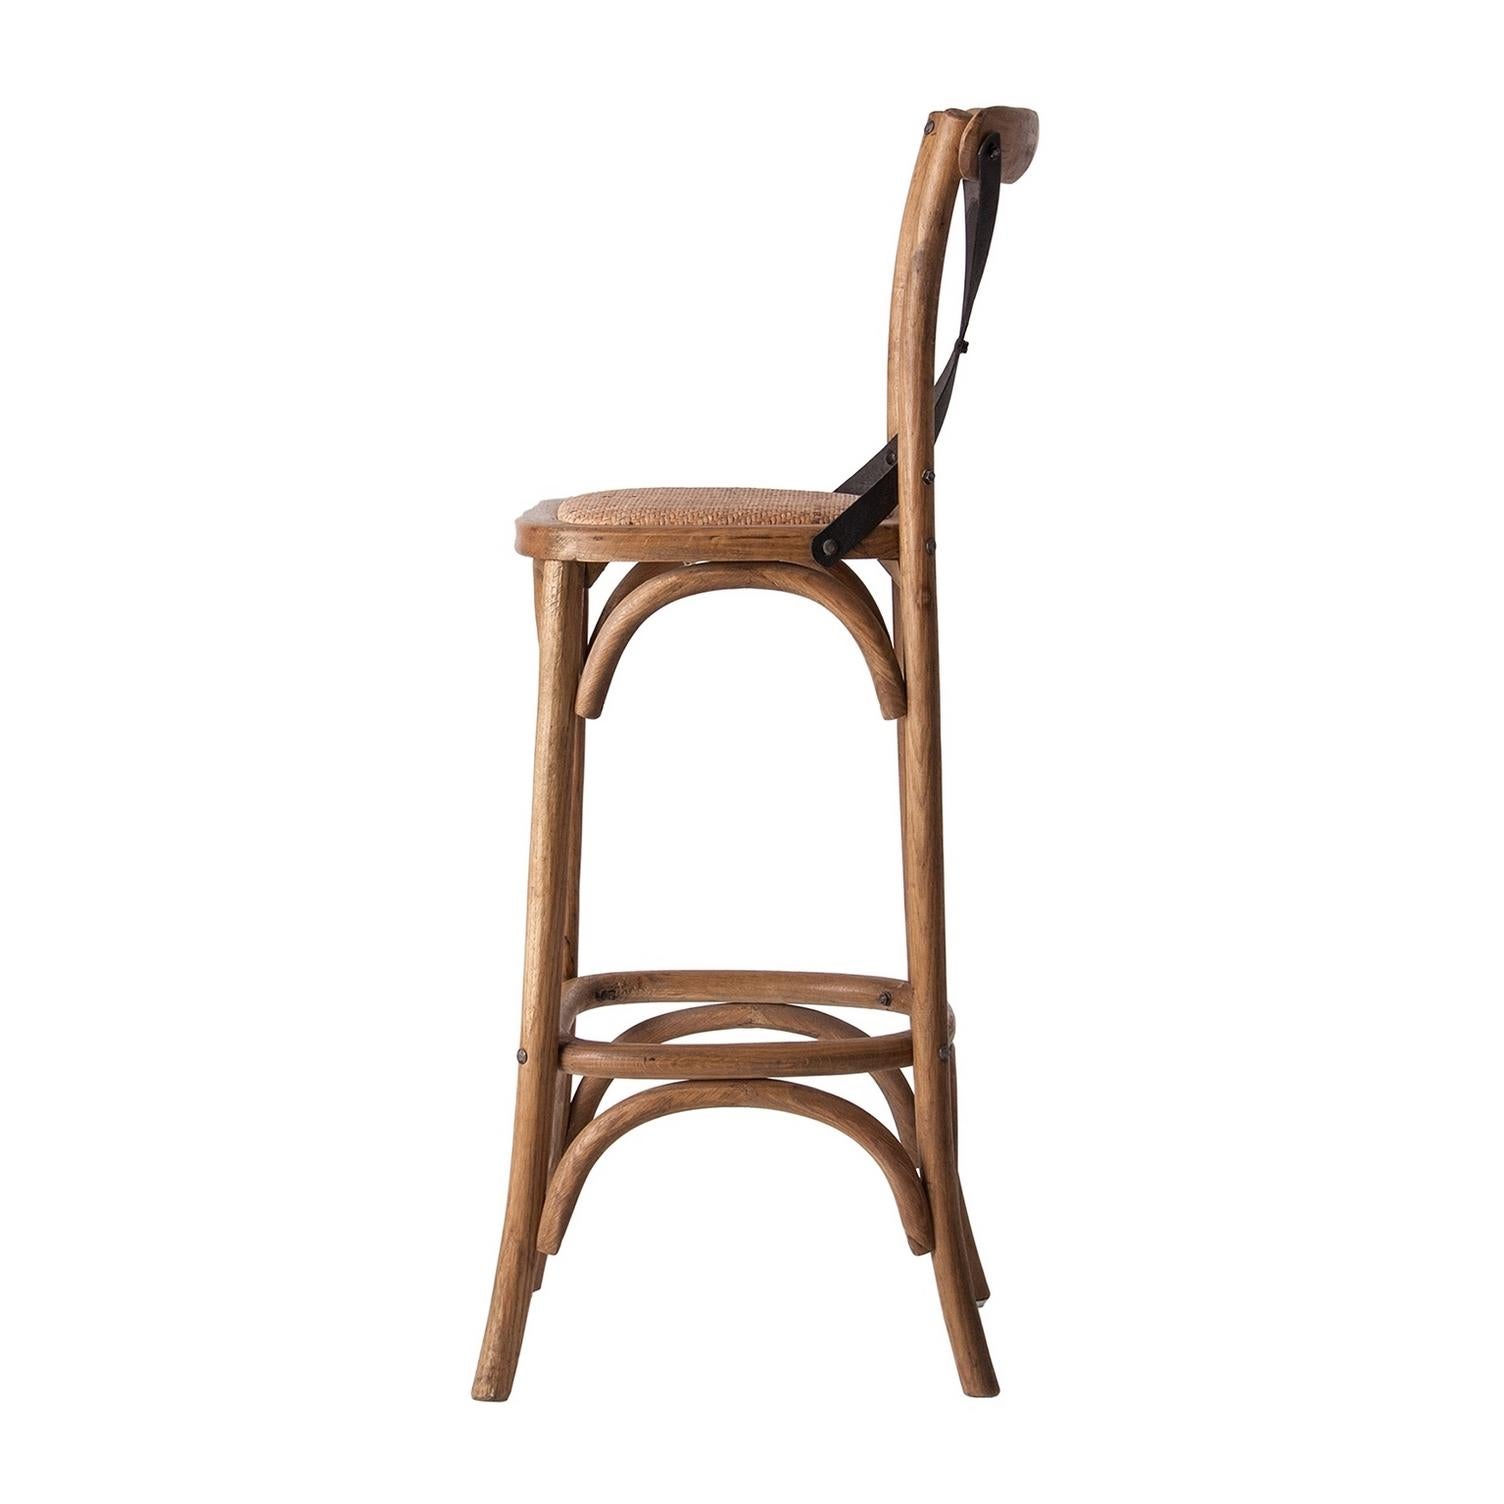 Elegant bar stool, at the manner of the old French bistros, with patina wooden structure and comfy wicker seat, combining quality, robustness and class. Comfortable and ergonomic, aerial and design.